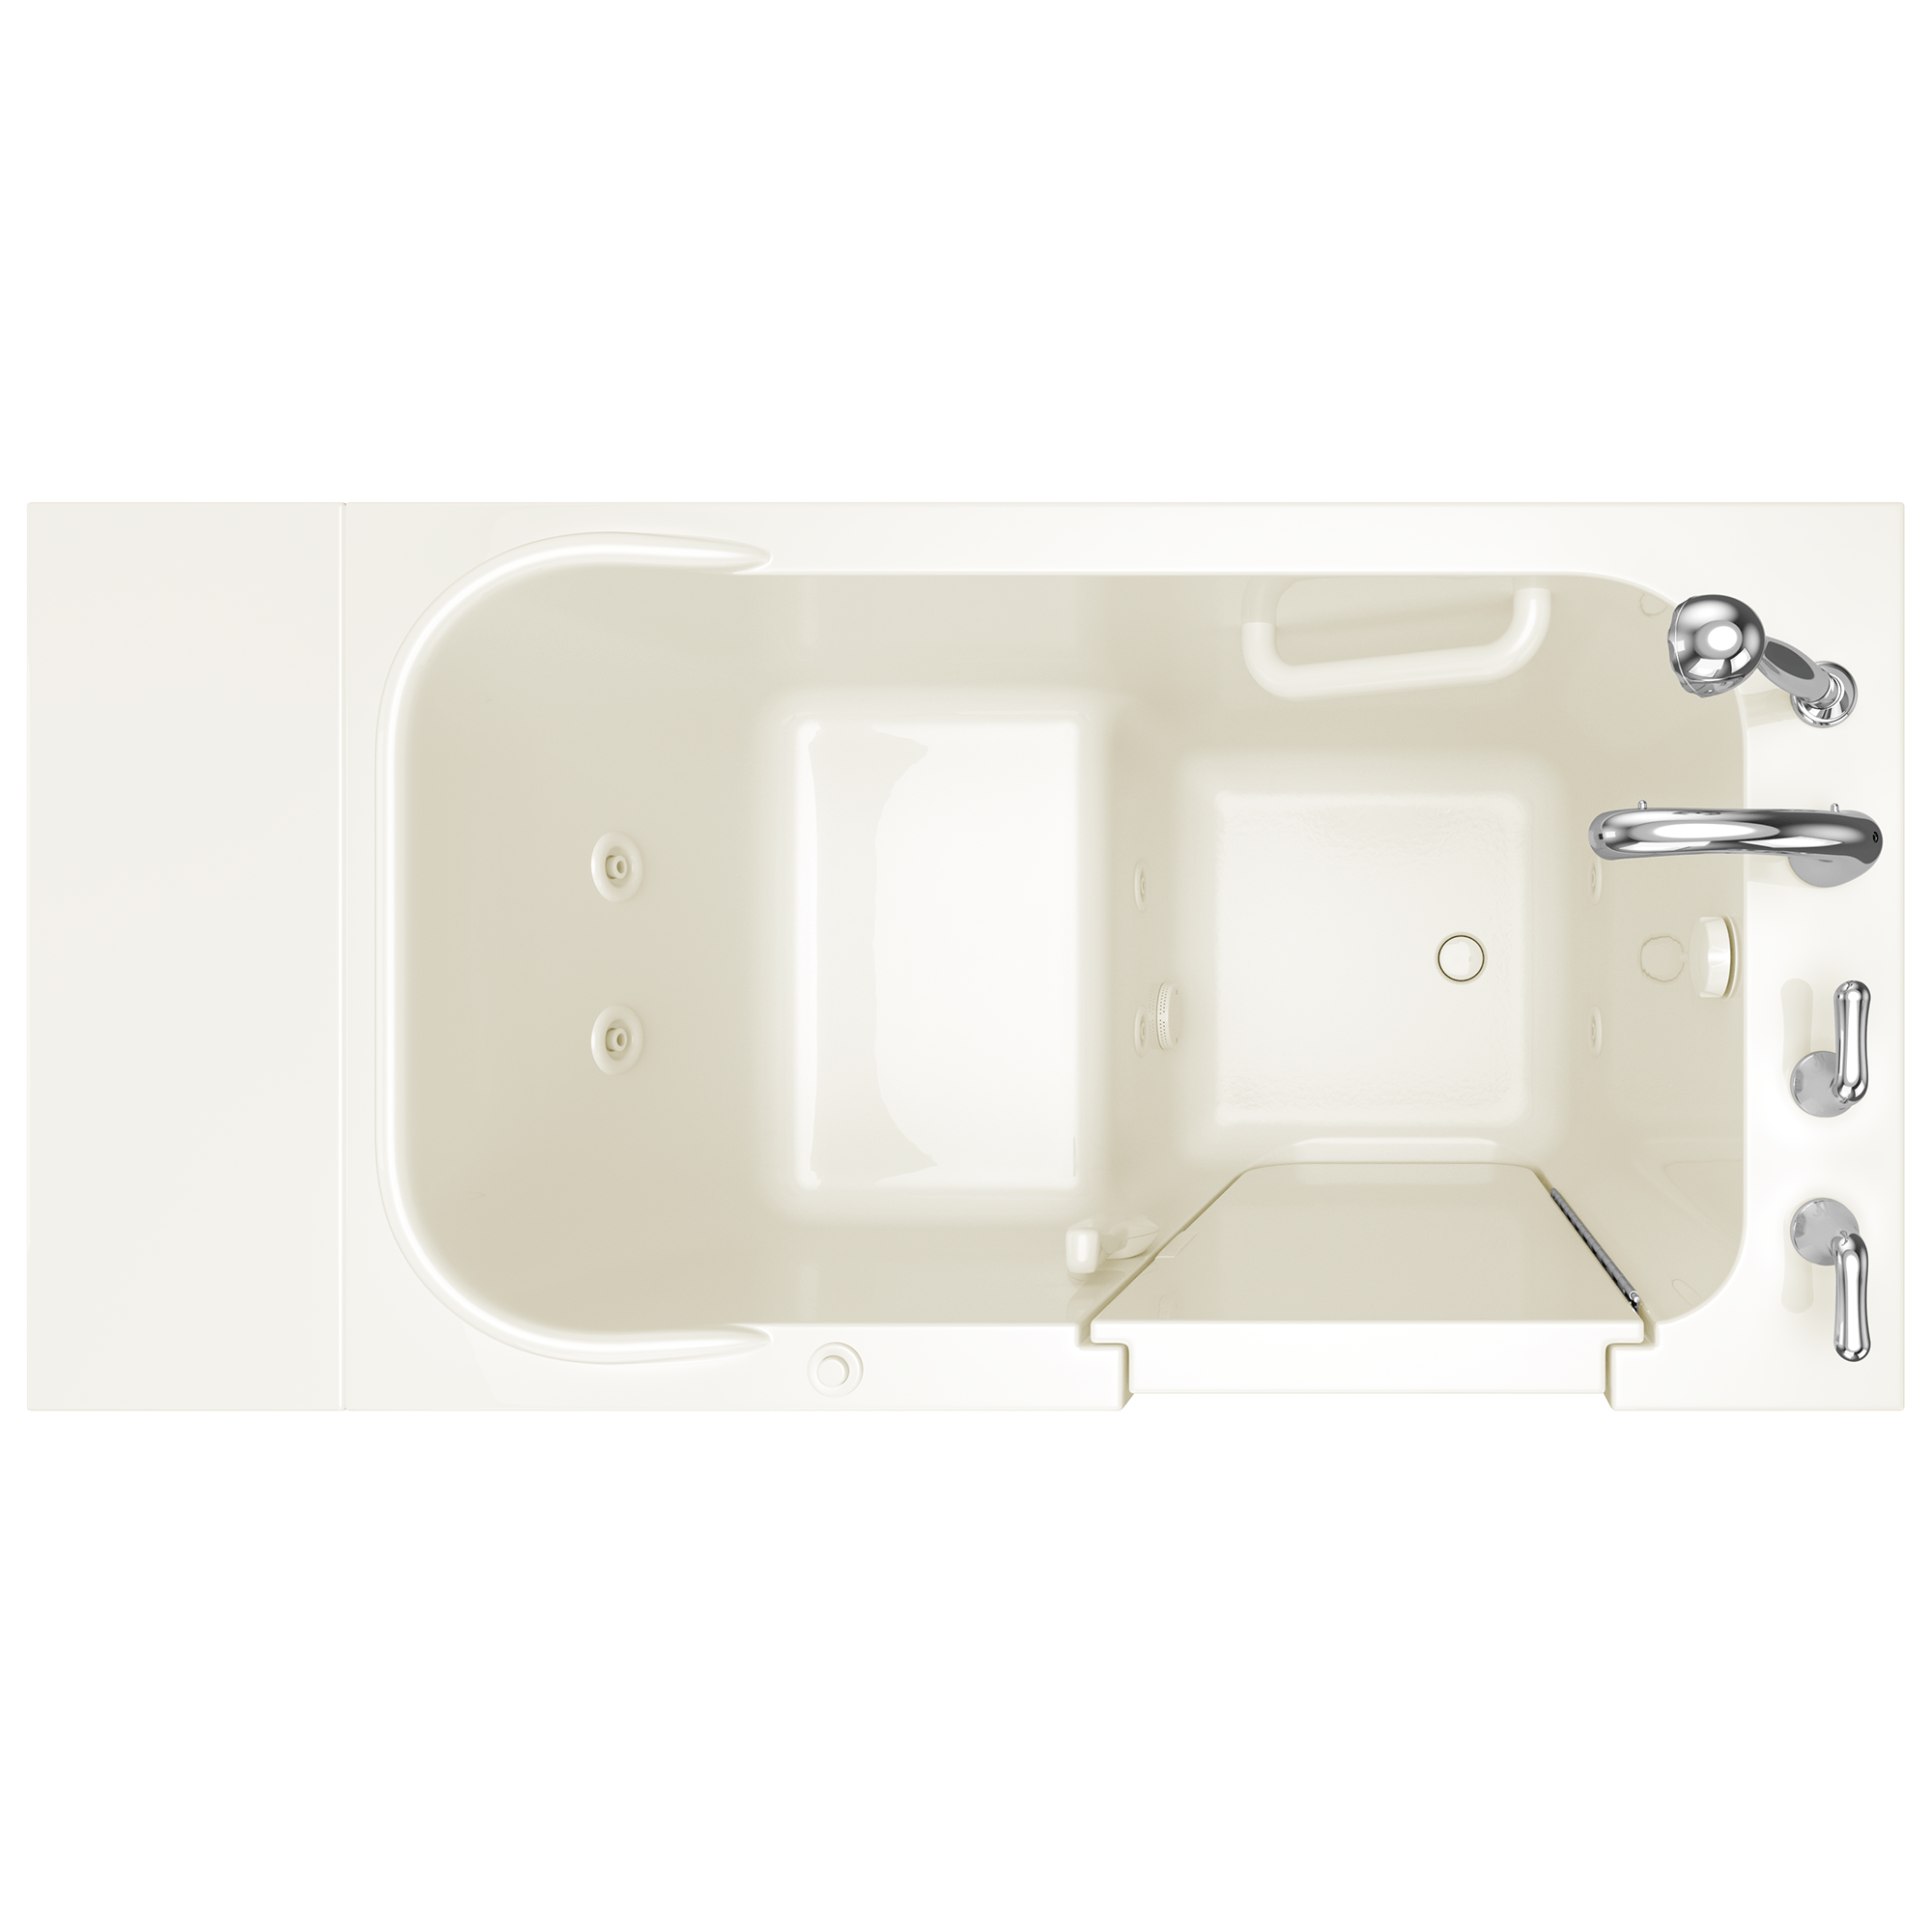 Gelcoat Entry Series 48 x 28 Inch Walk In Tub With Whirlpool System - Right Hand Drain With Faucet ST BISCUIT